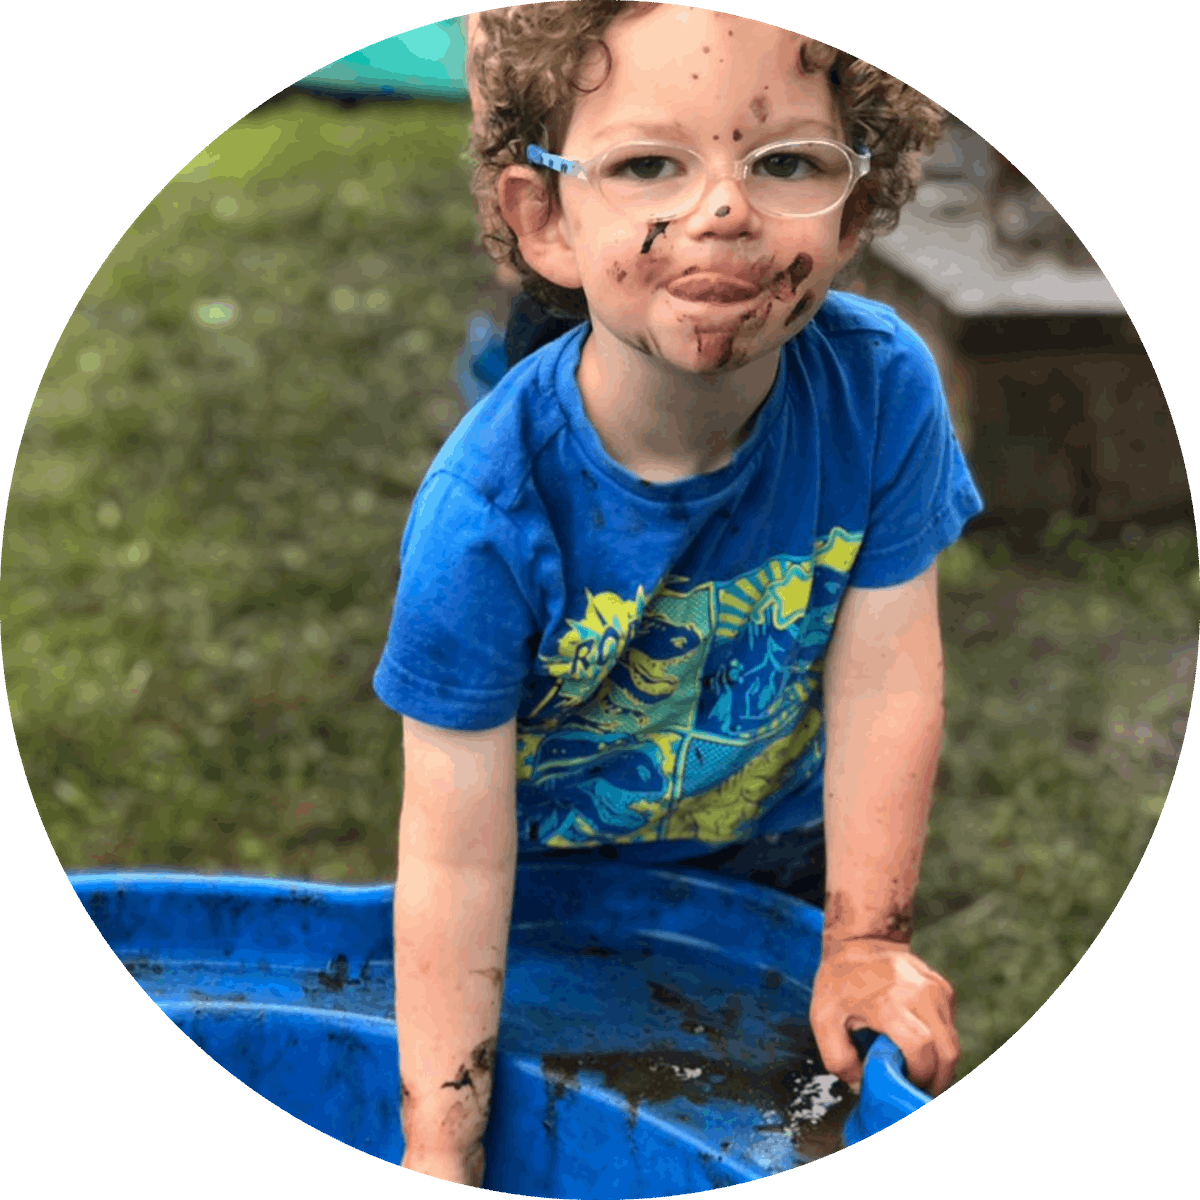 child playing in mud